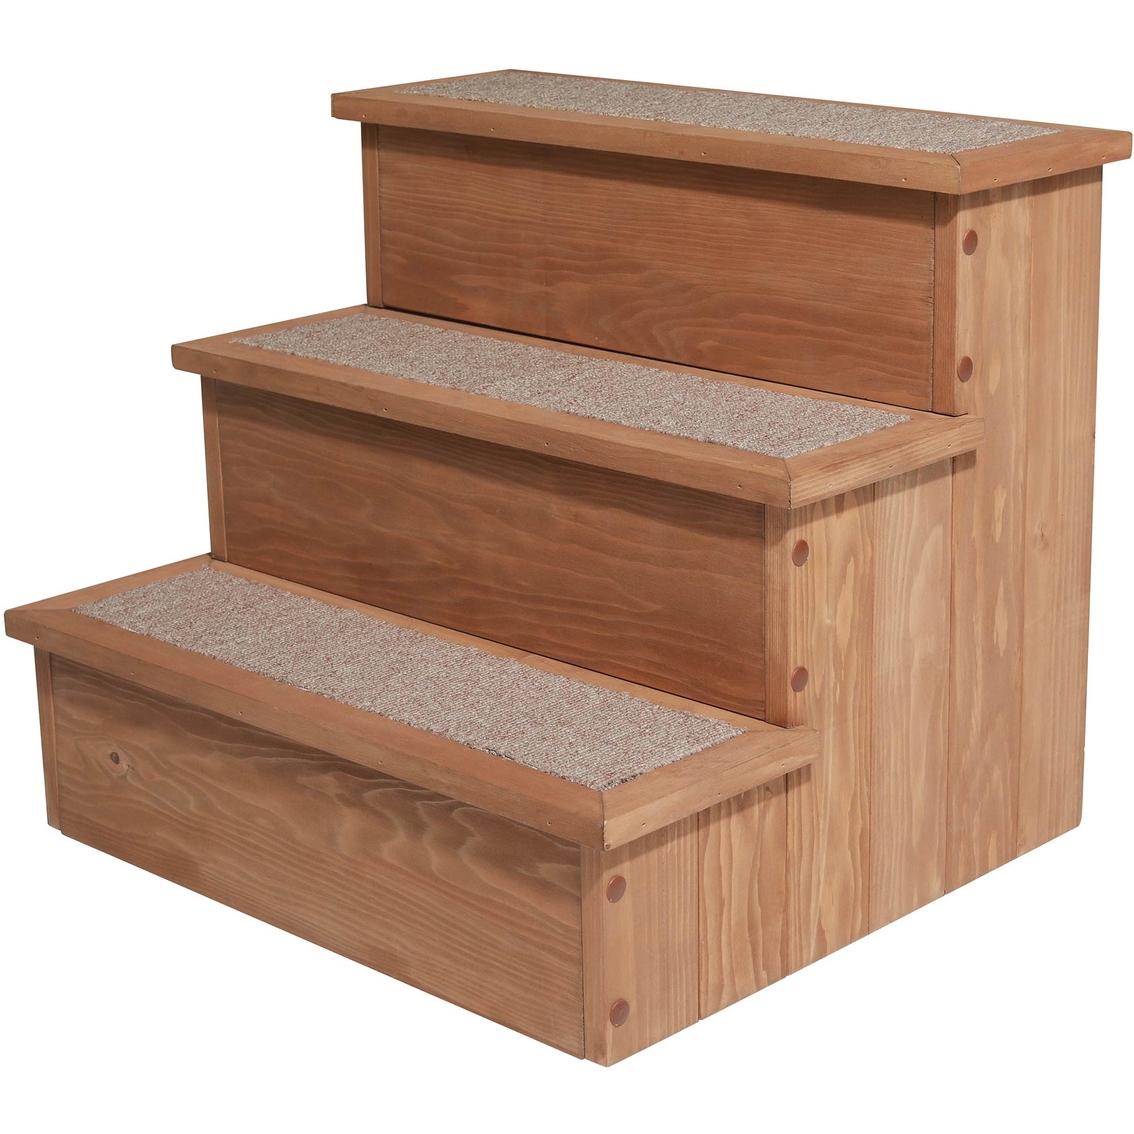 Zoovilla Yorkshire Pet Step with Storage